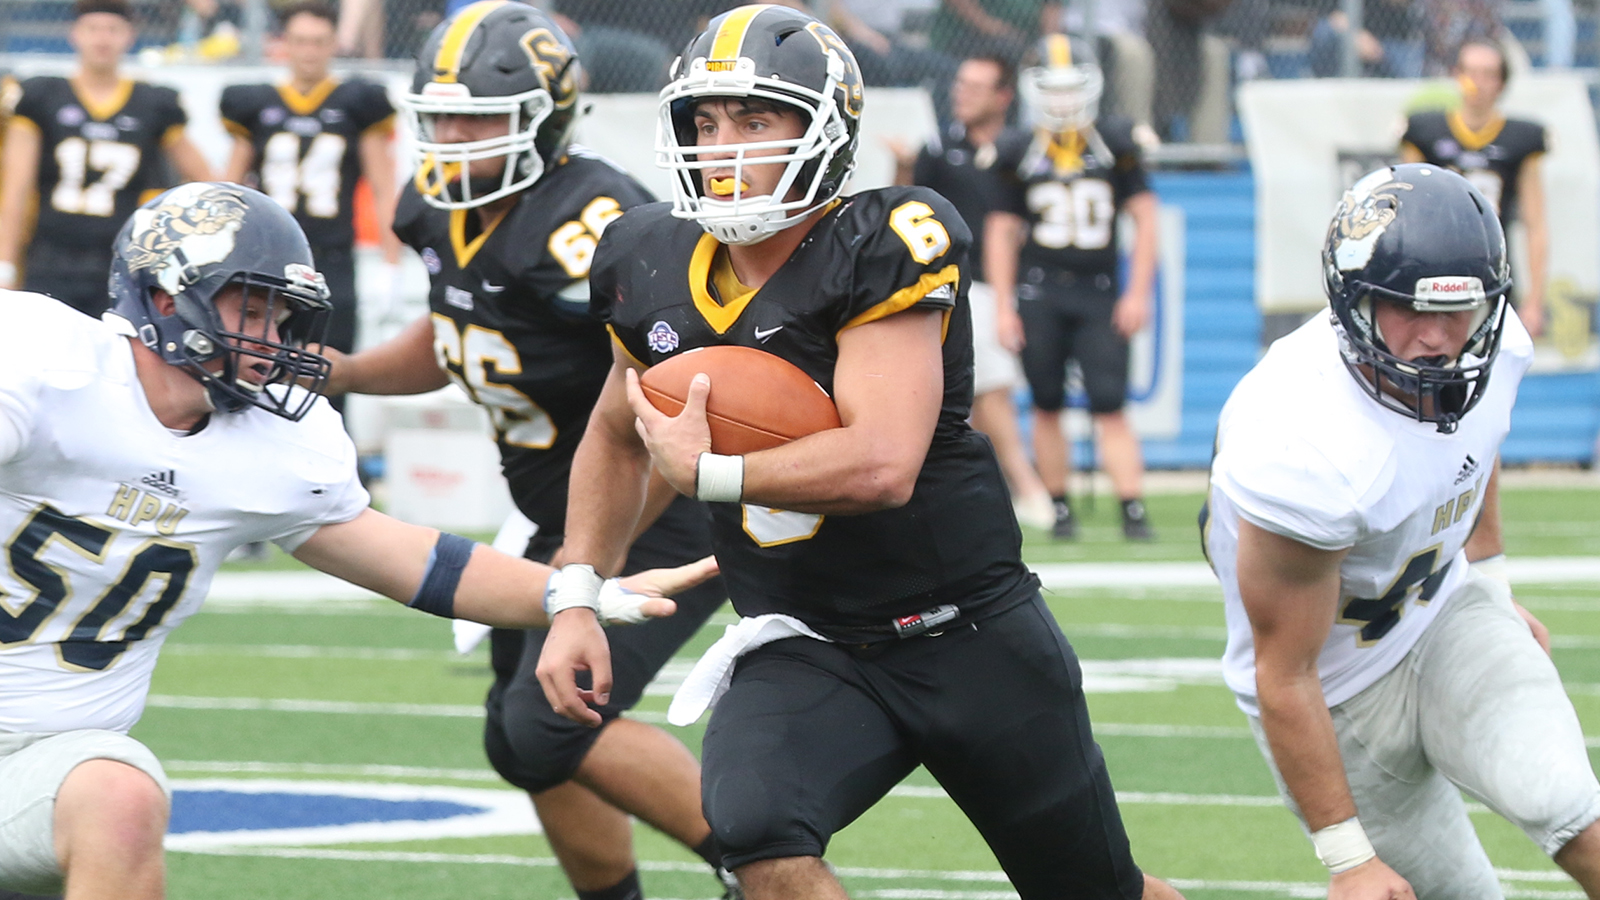 Records Fall as Pirates Celebrate Homecoming with Rout of Howard Payne